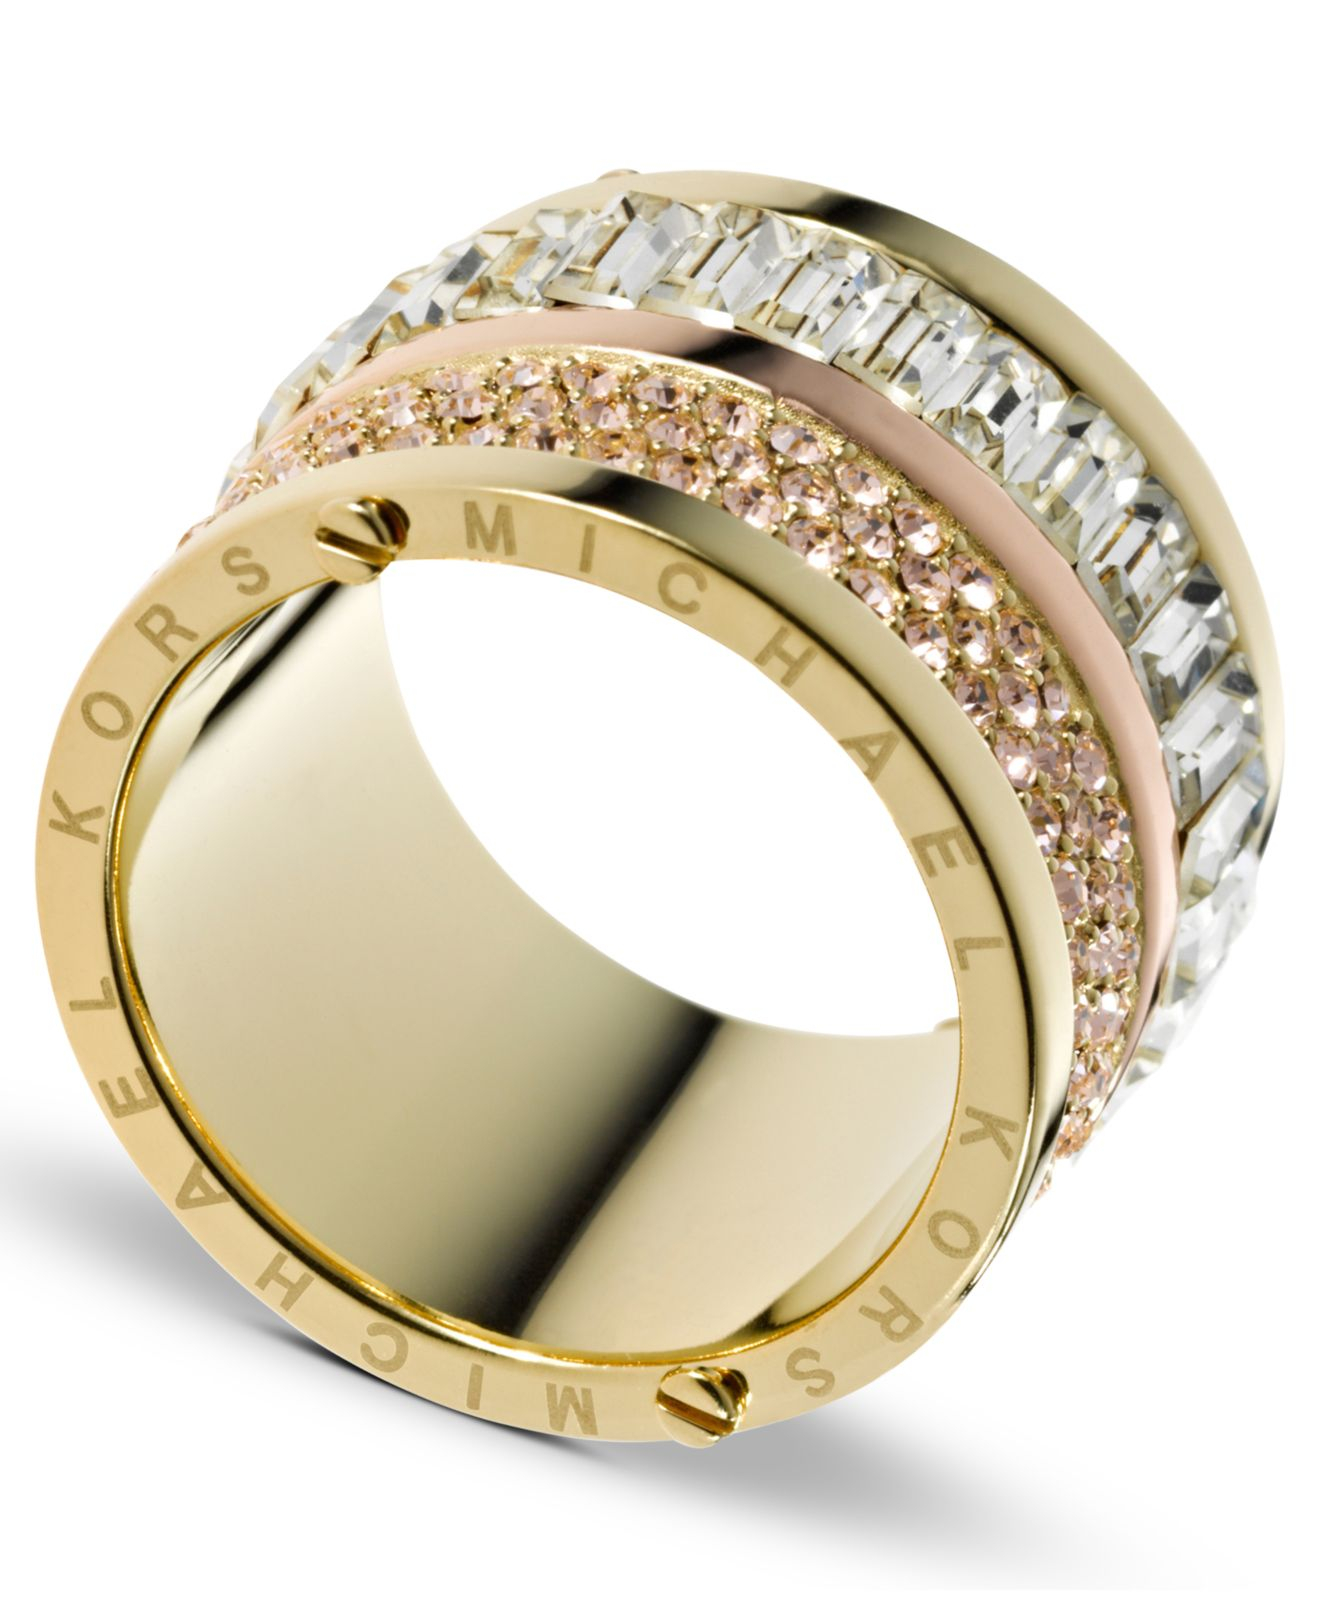 Michael Kors GoldTone Pave And Stone Barrel Ring in Metallic Lyst